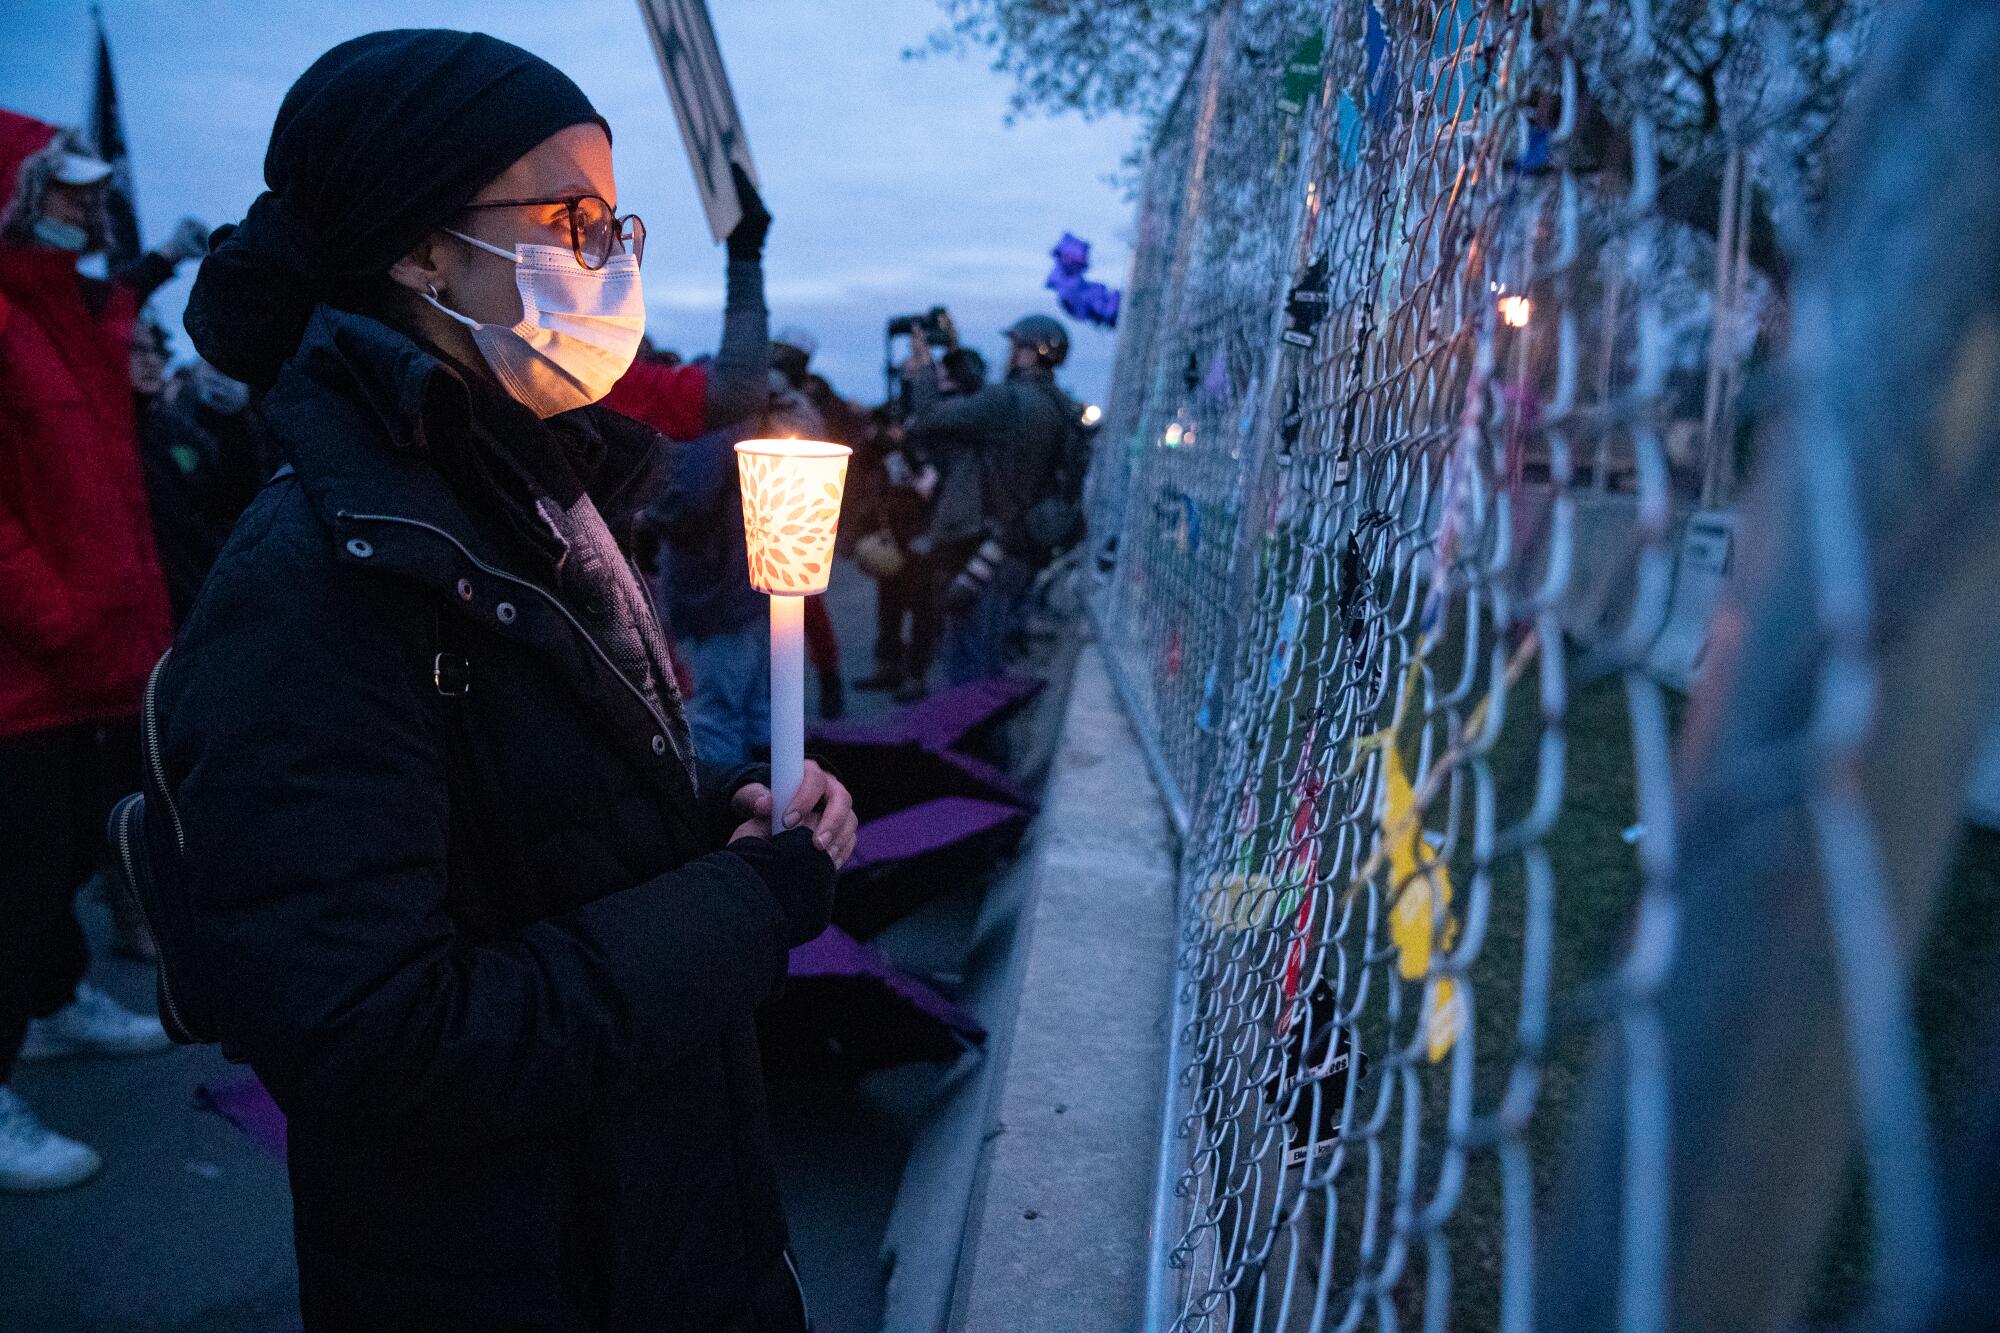 A protester holds a candle